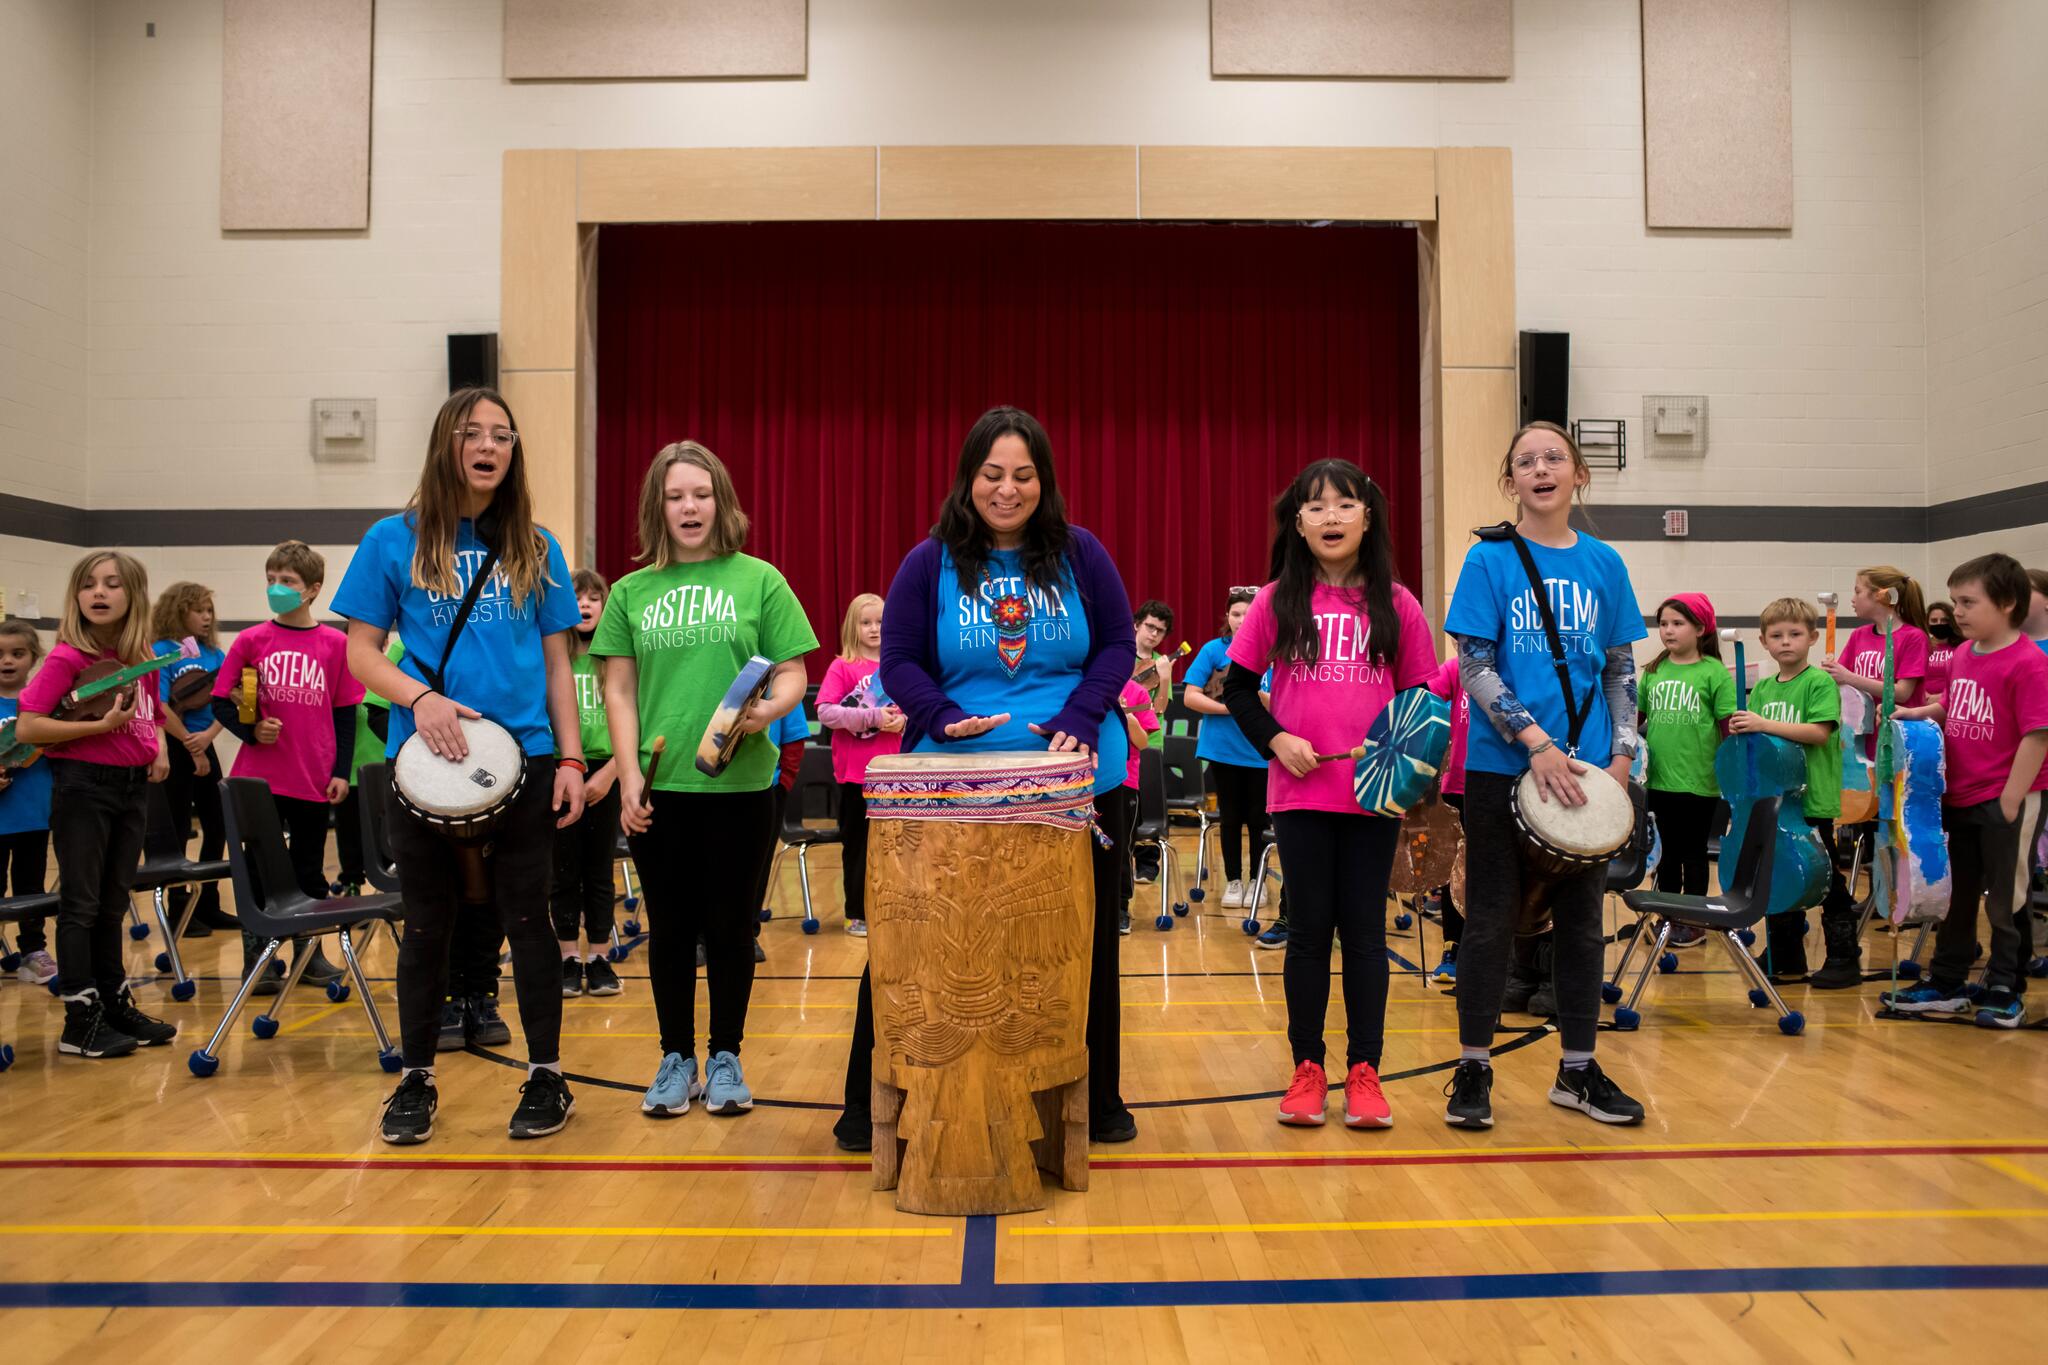 Students in colourful t-shirts stand in a semi-circle with instruments. They are led by a teacher on a large wooden drum that stands in the middle.